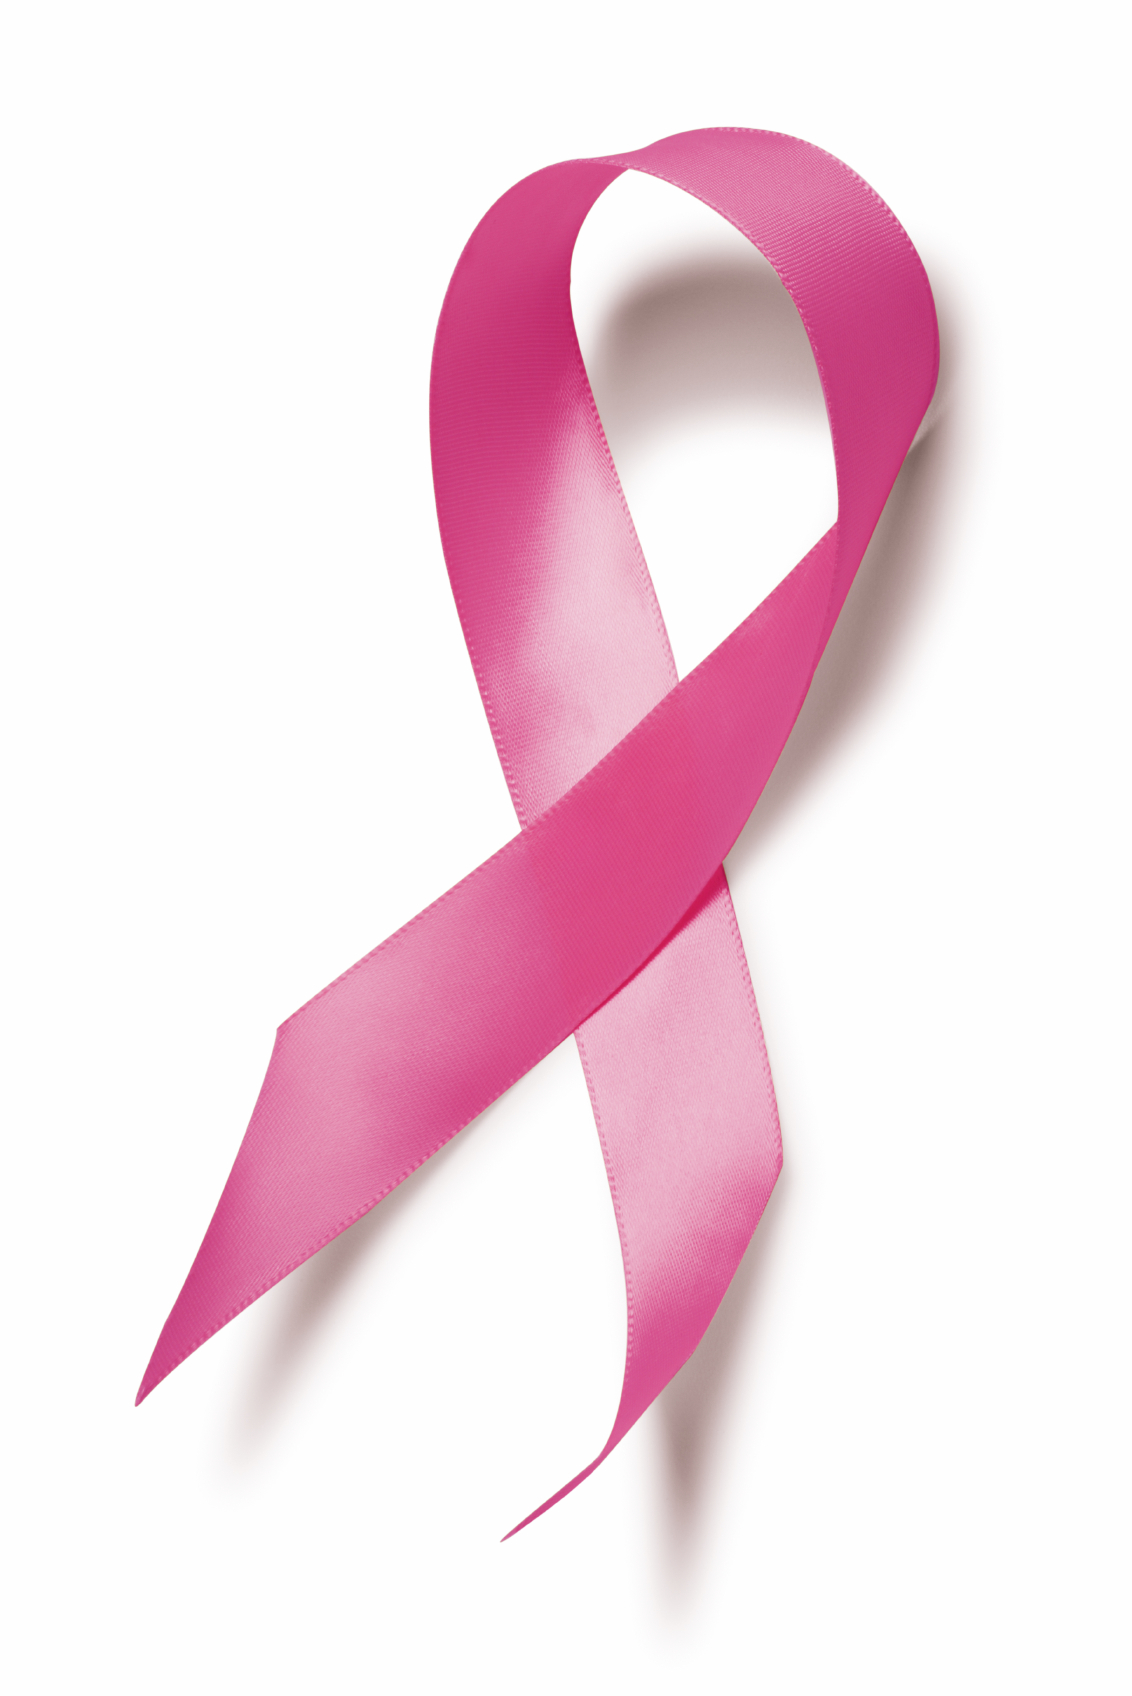 Five things women need to know about breast cancer | Blue Ribbon News